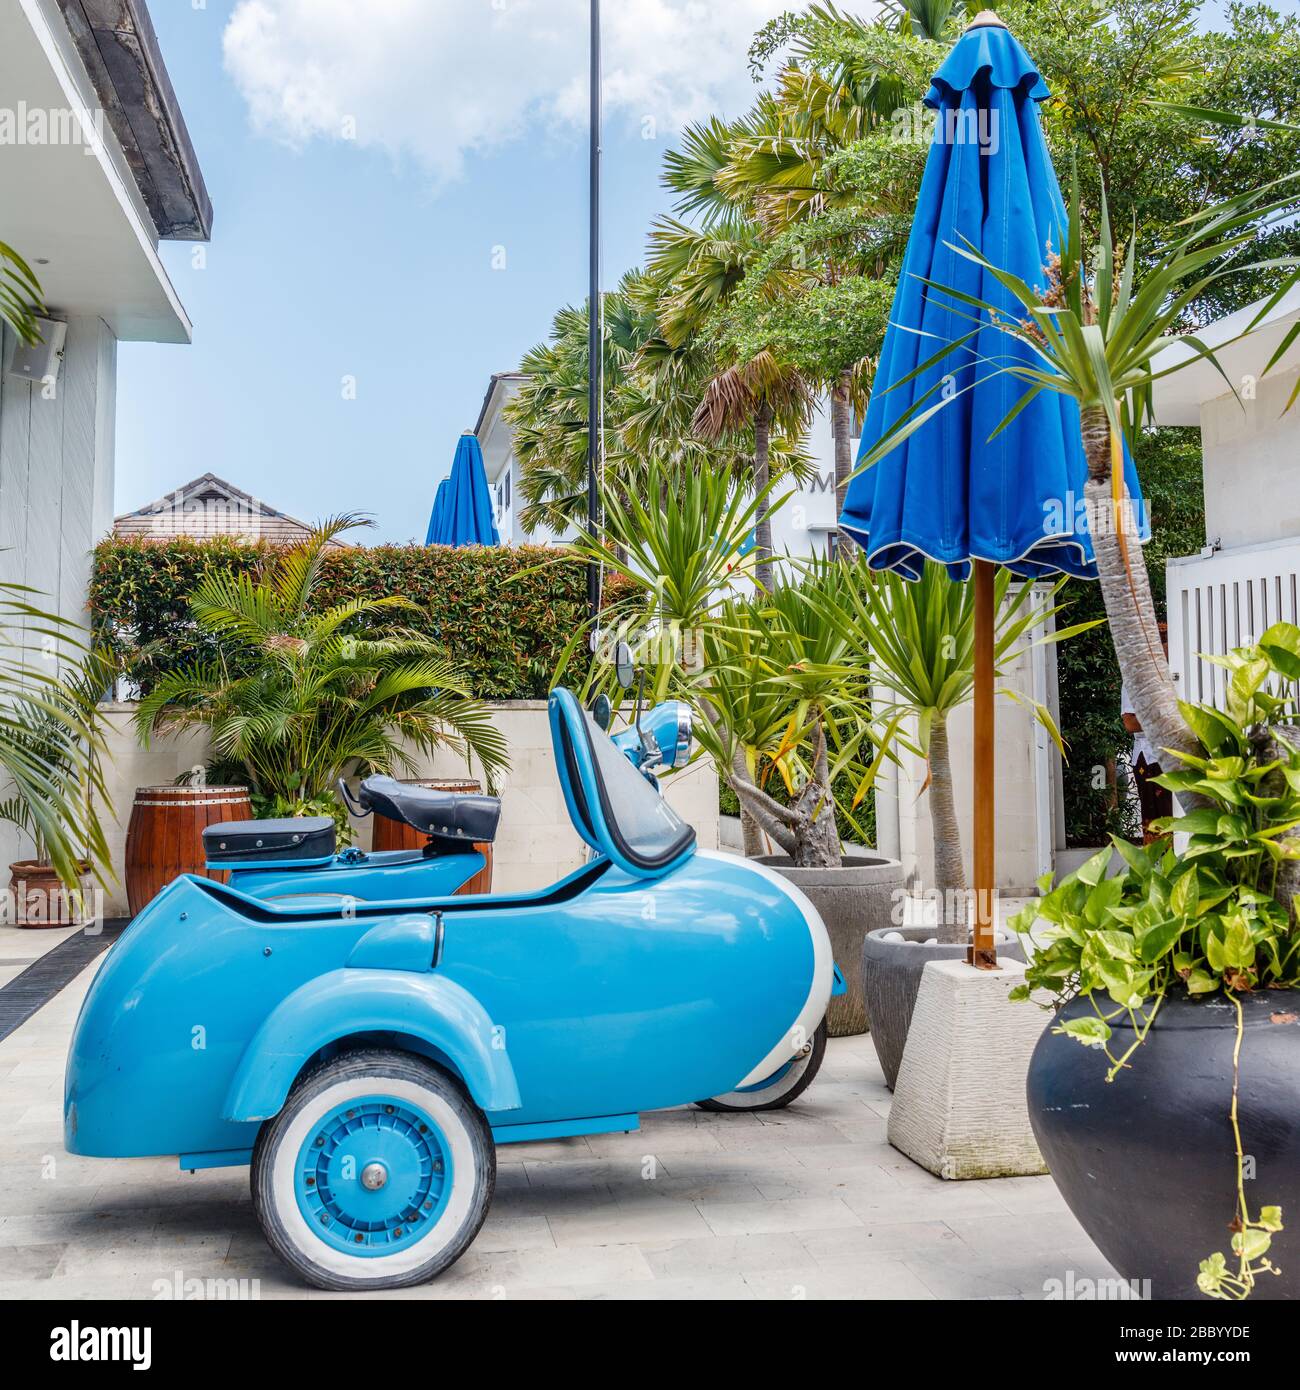 Brand new sky blue stylish moped with a sidecar. Blue sun umbrellas.  Square image. Stock Photo